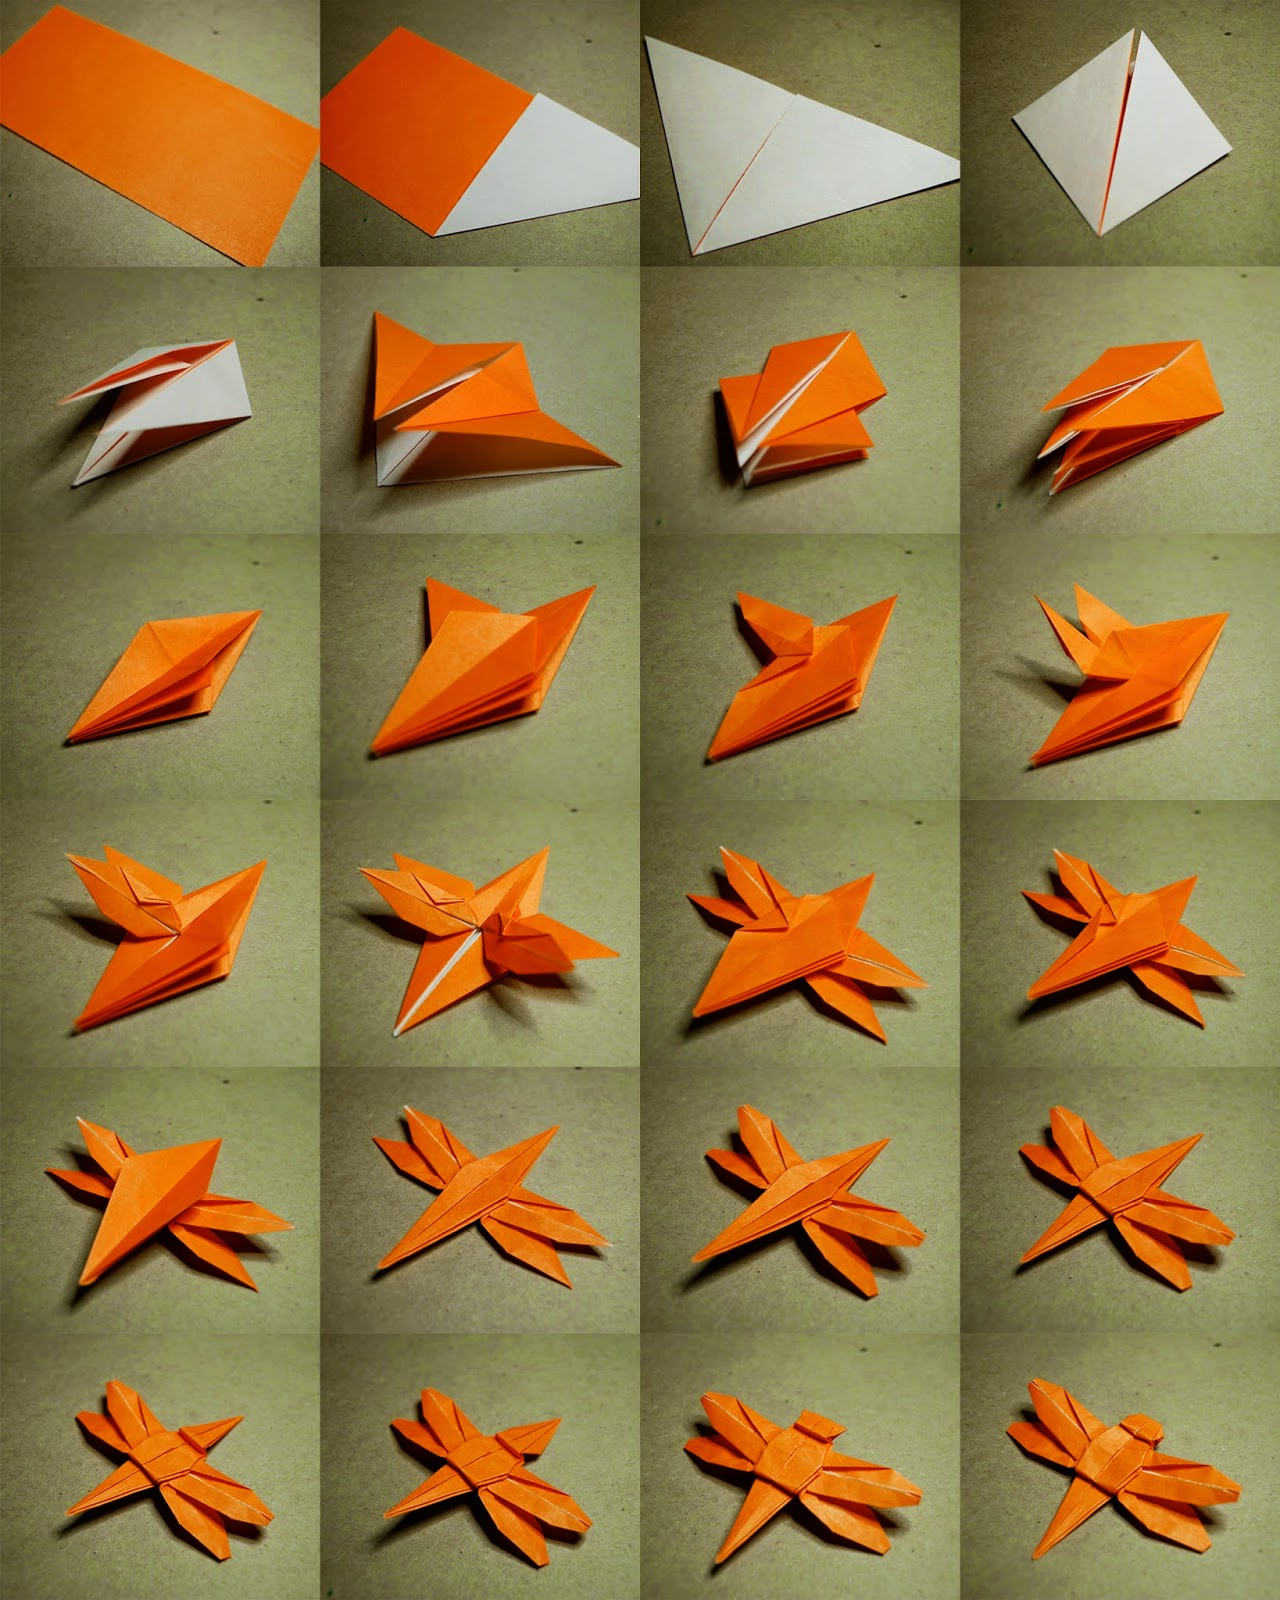 Dragon Fly Origami Origami Dragonfly Instructions Origami Flower Easy